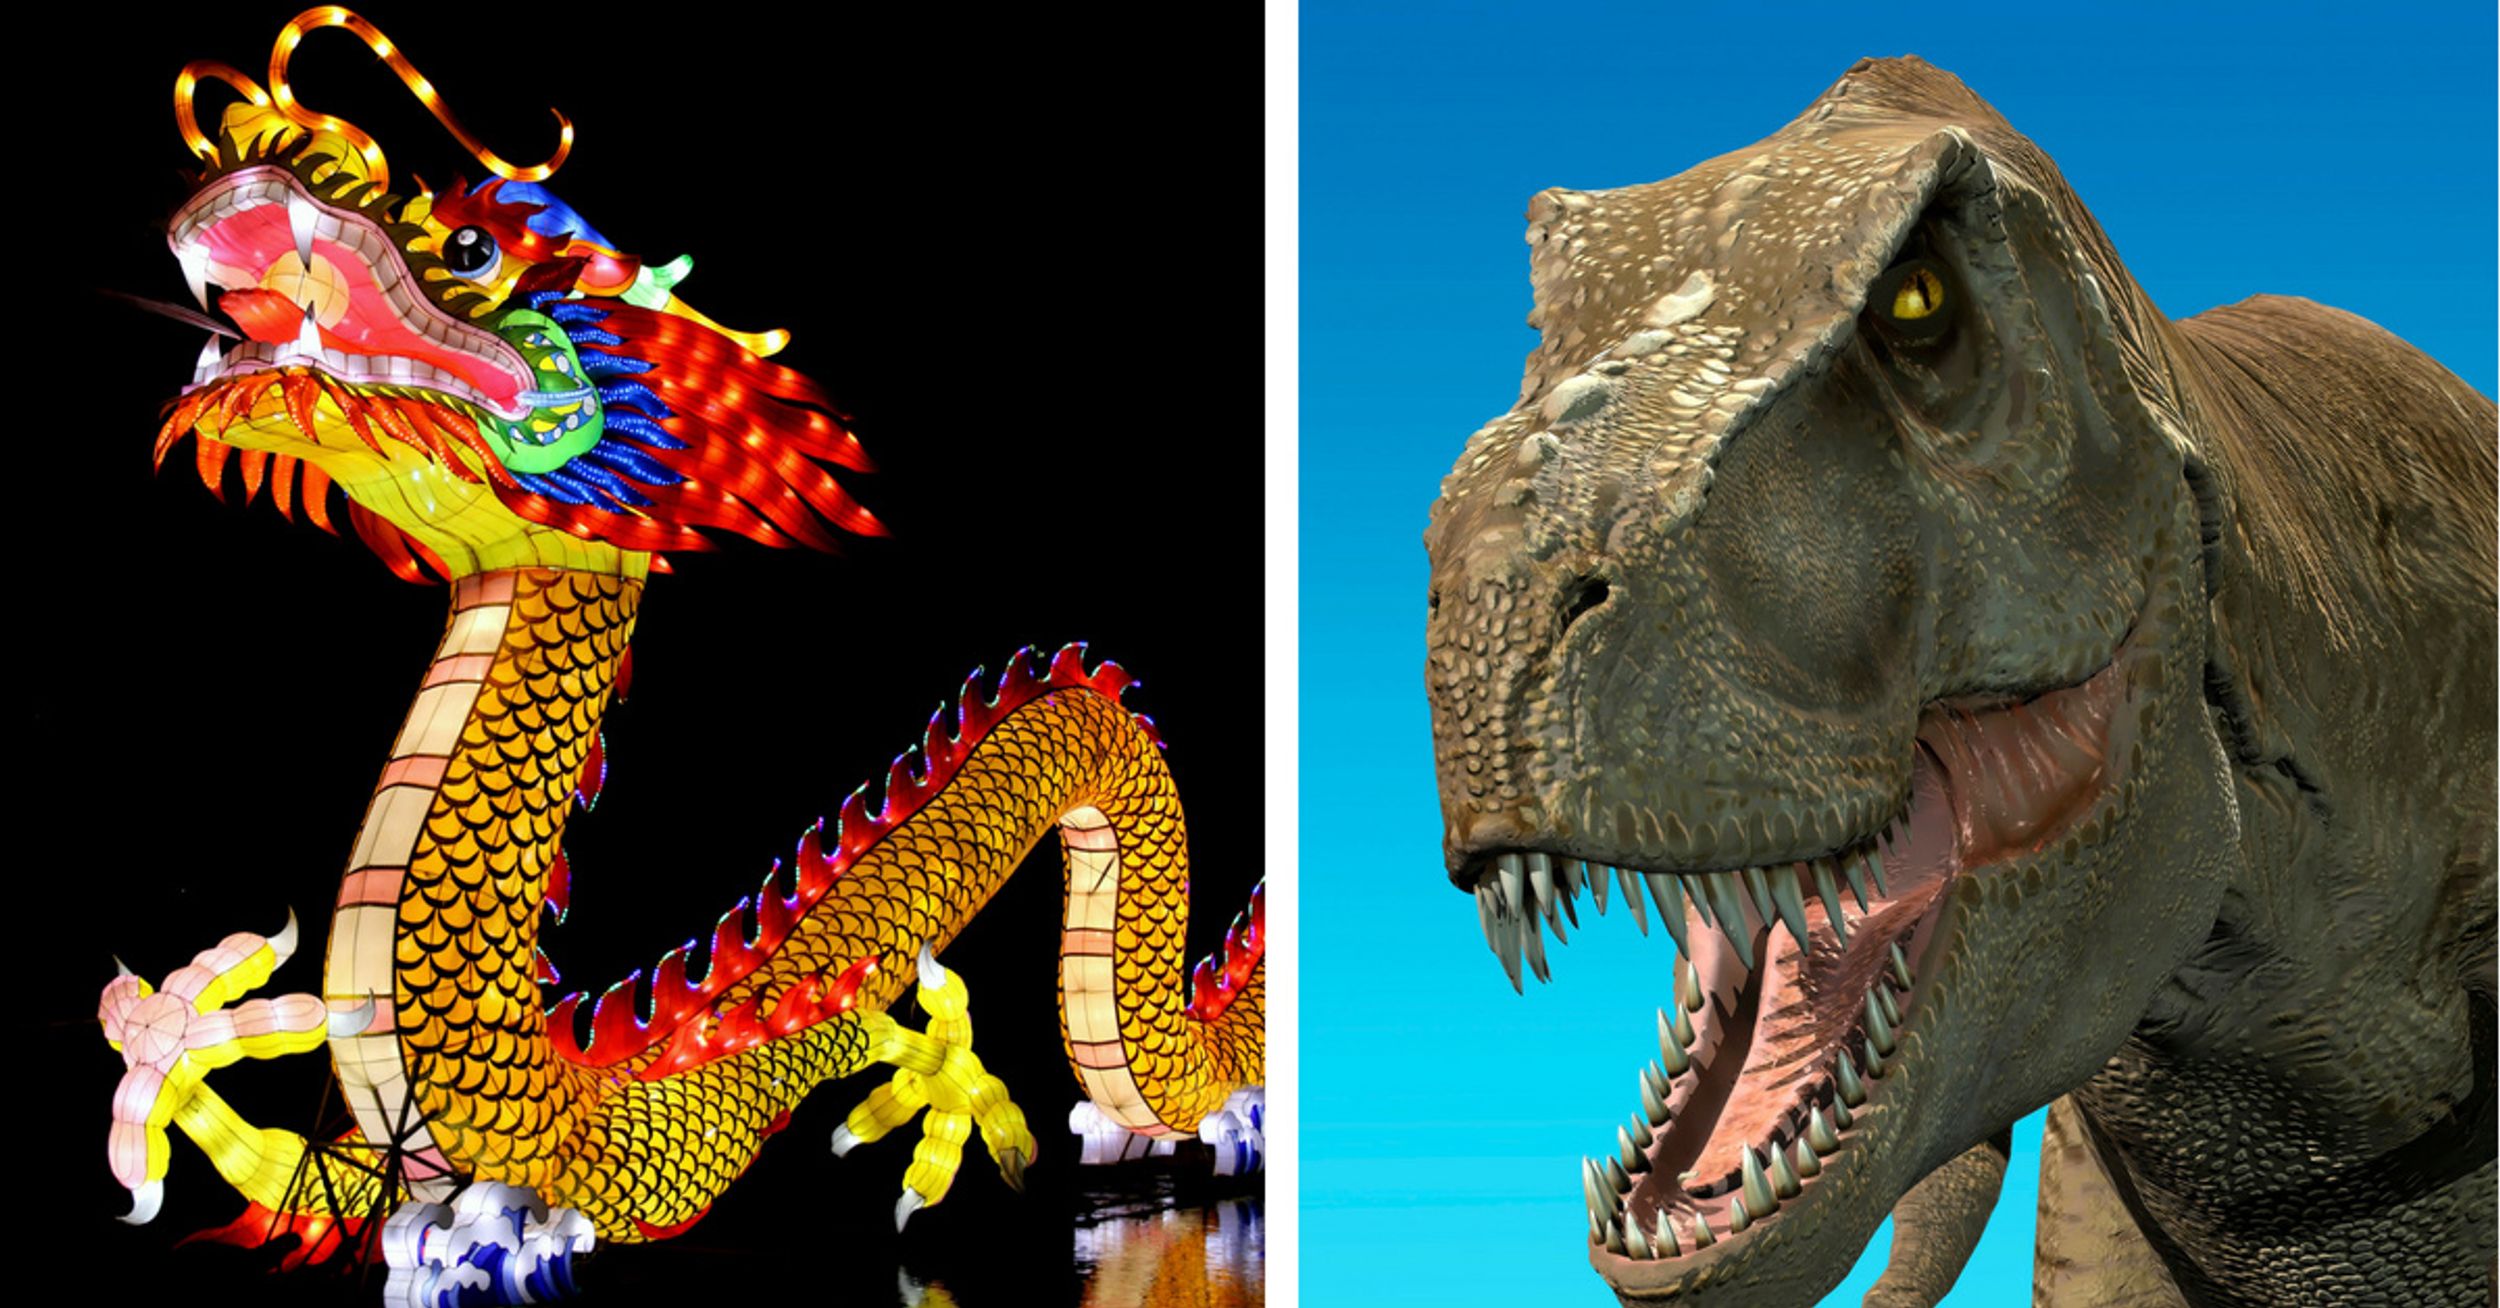 New Dinosaur Discovery Called 'Amazing Dragon' By Chinese Scientists